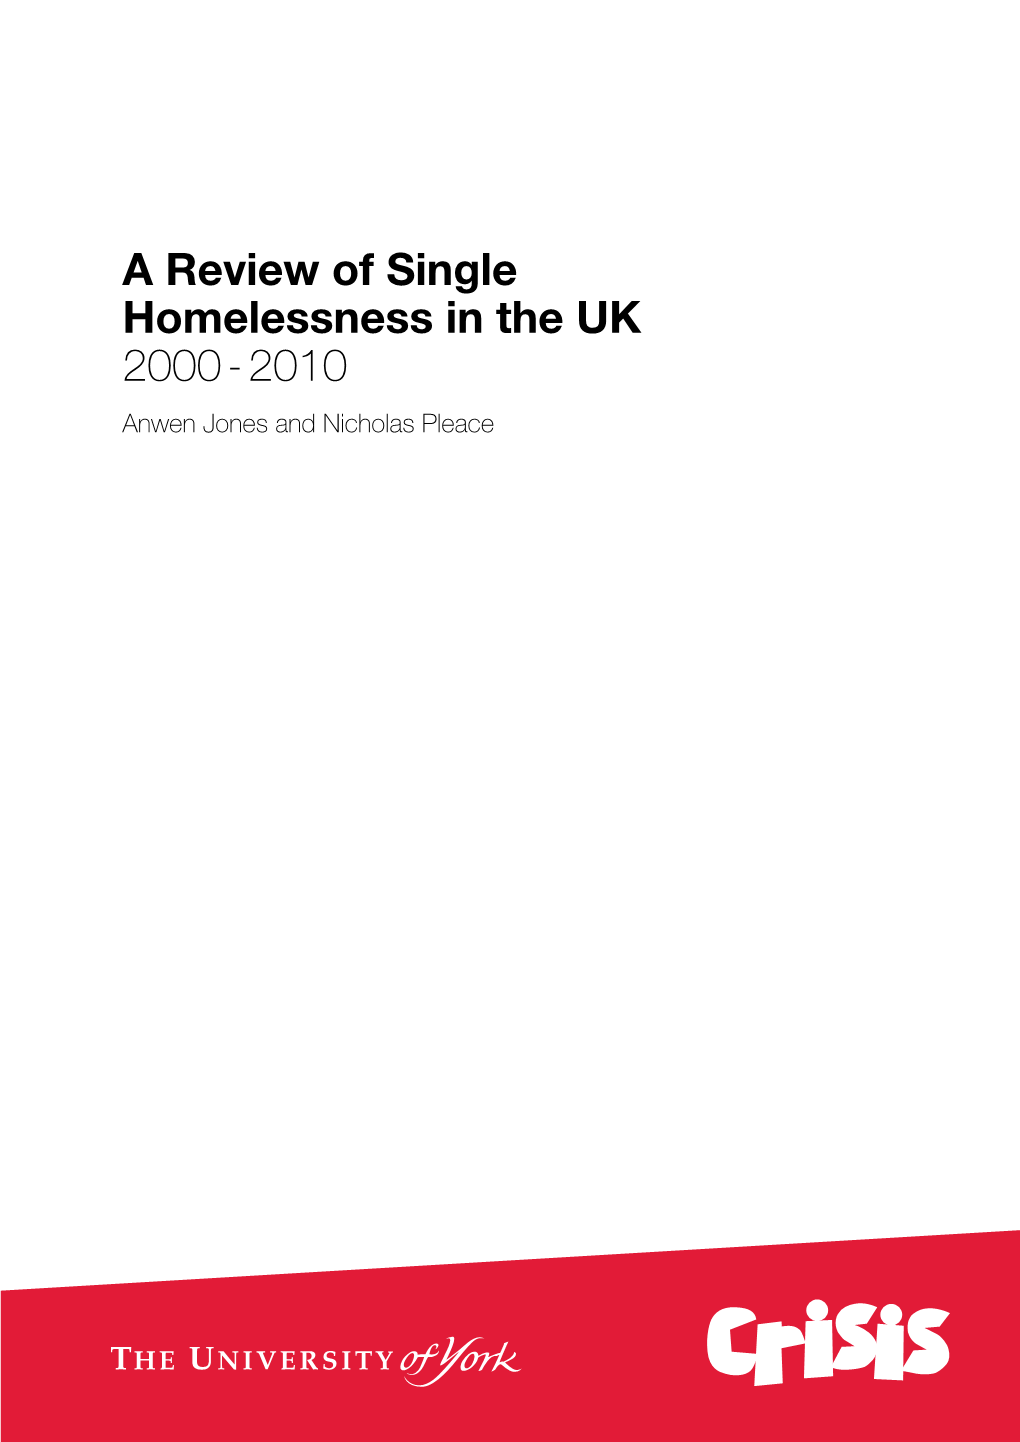 A Review of Single Homelessness in the UK 2000 - 2010 Anwen Jones and Nicholas Pleace Ii a Review of Single Homelessness in the UK 2000 - 2010